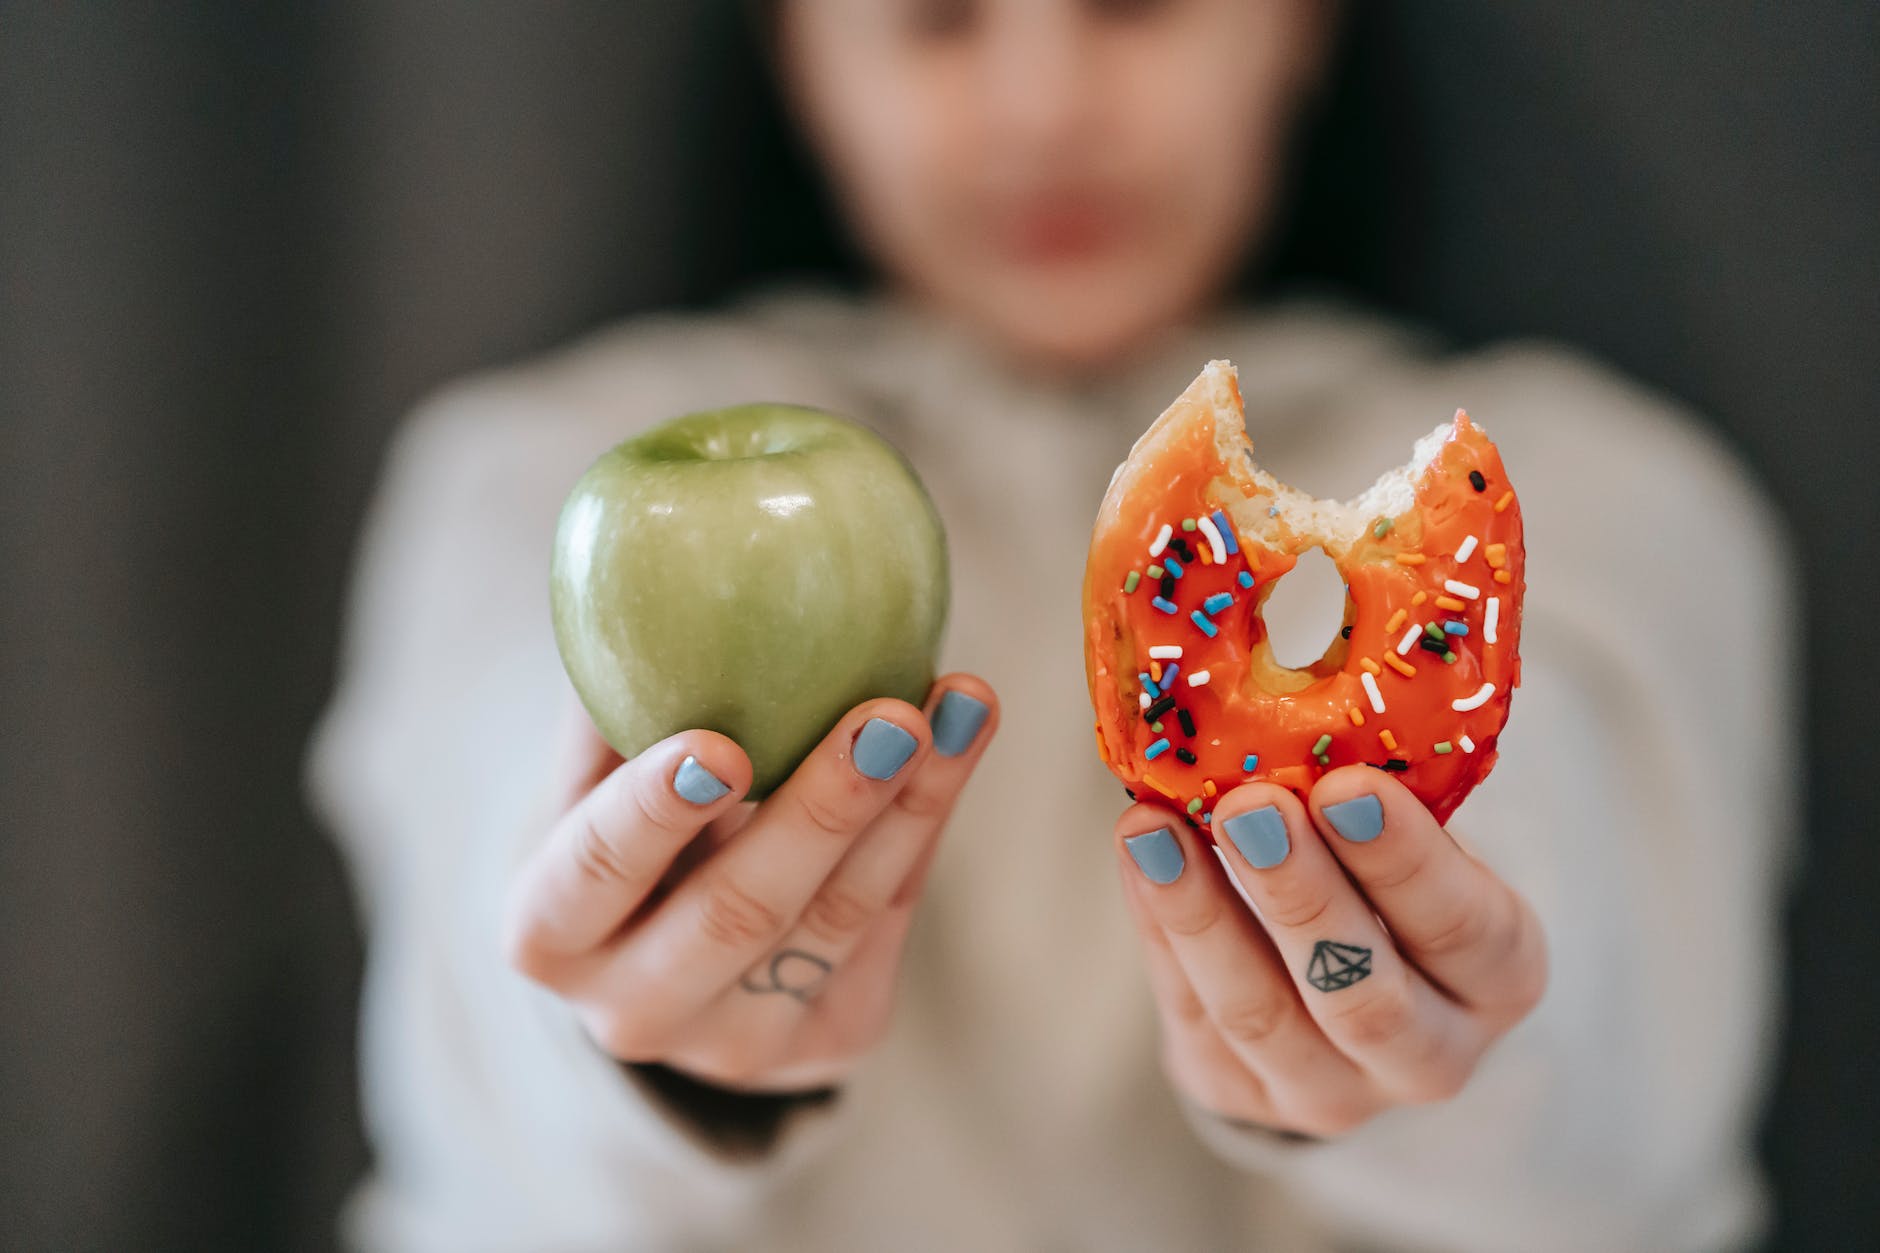 woman showing apple and bitten doughnutpexels-photo-6551415